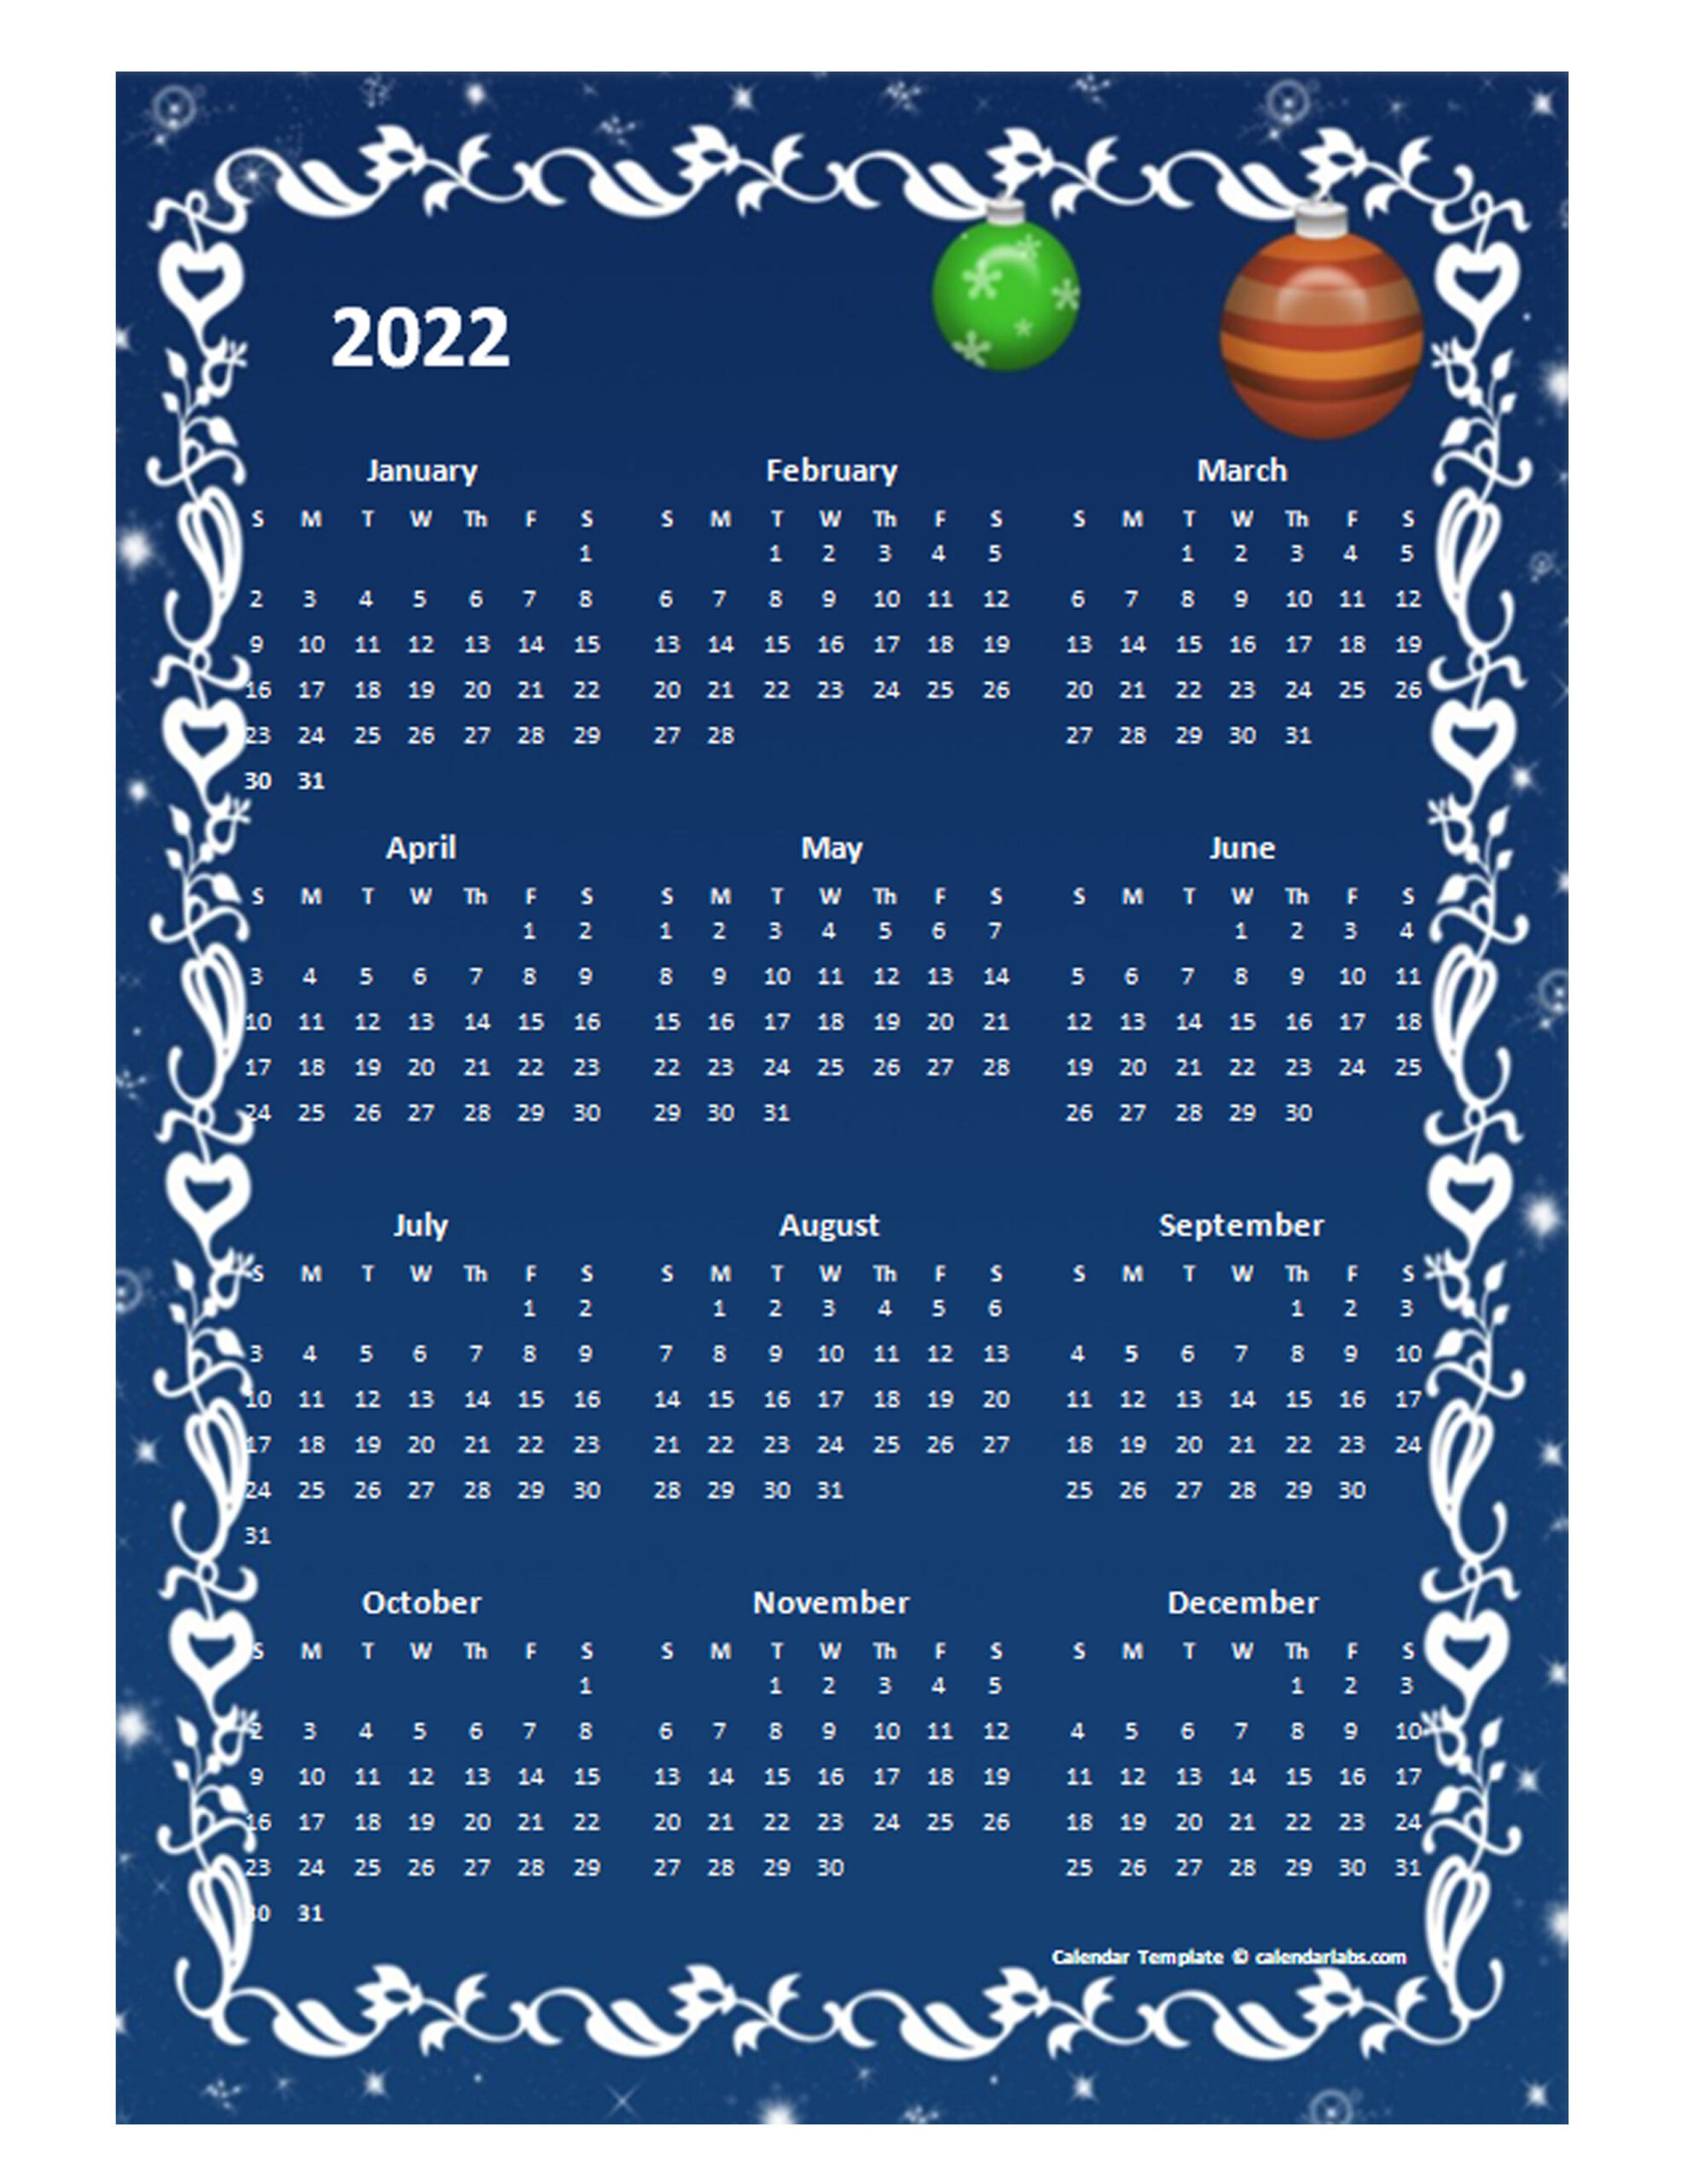 2022 Yearly Calendar Design Template - Free Printable Templates-Printable Monthly Calendar For 2022